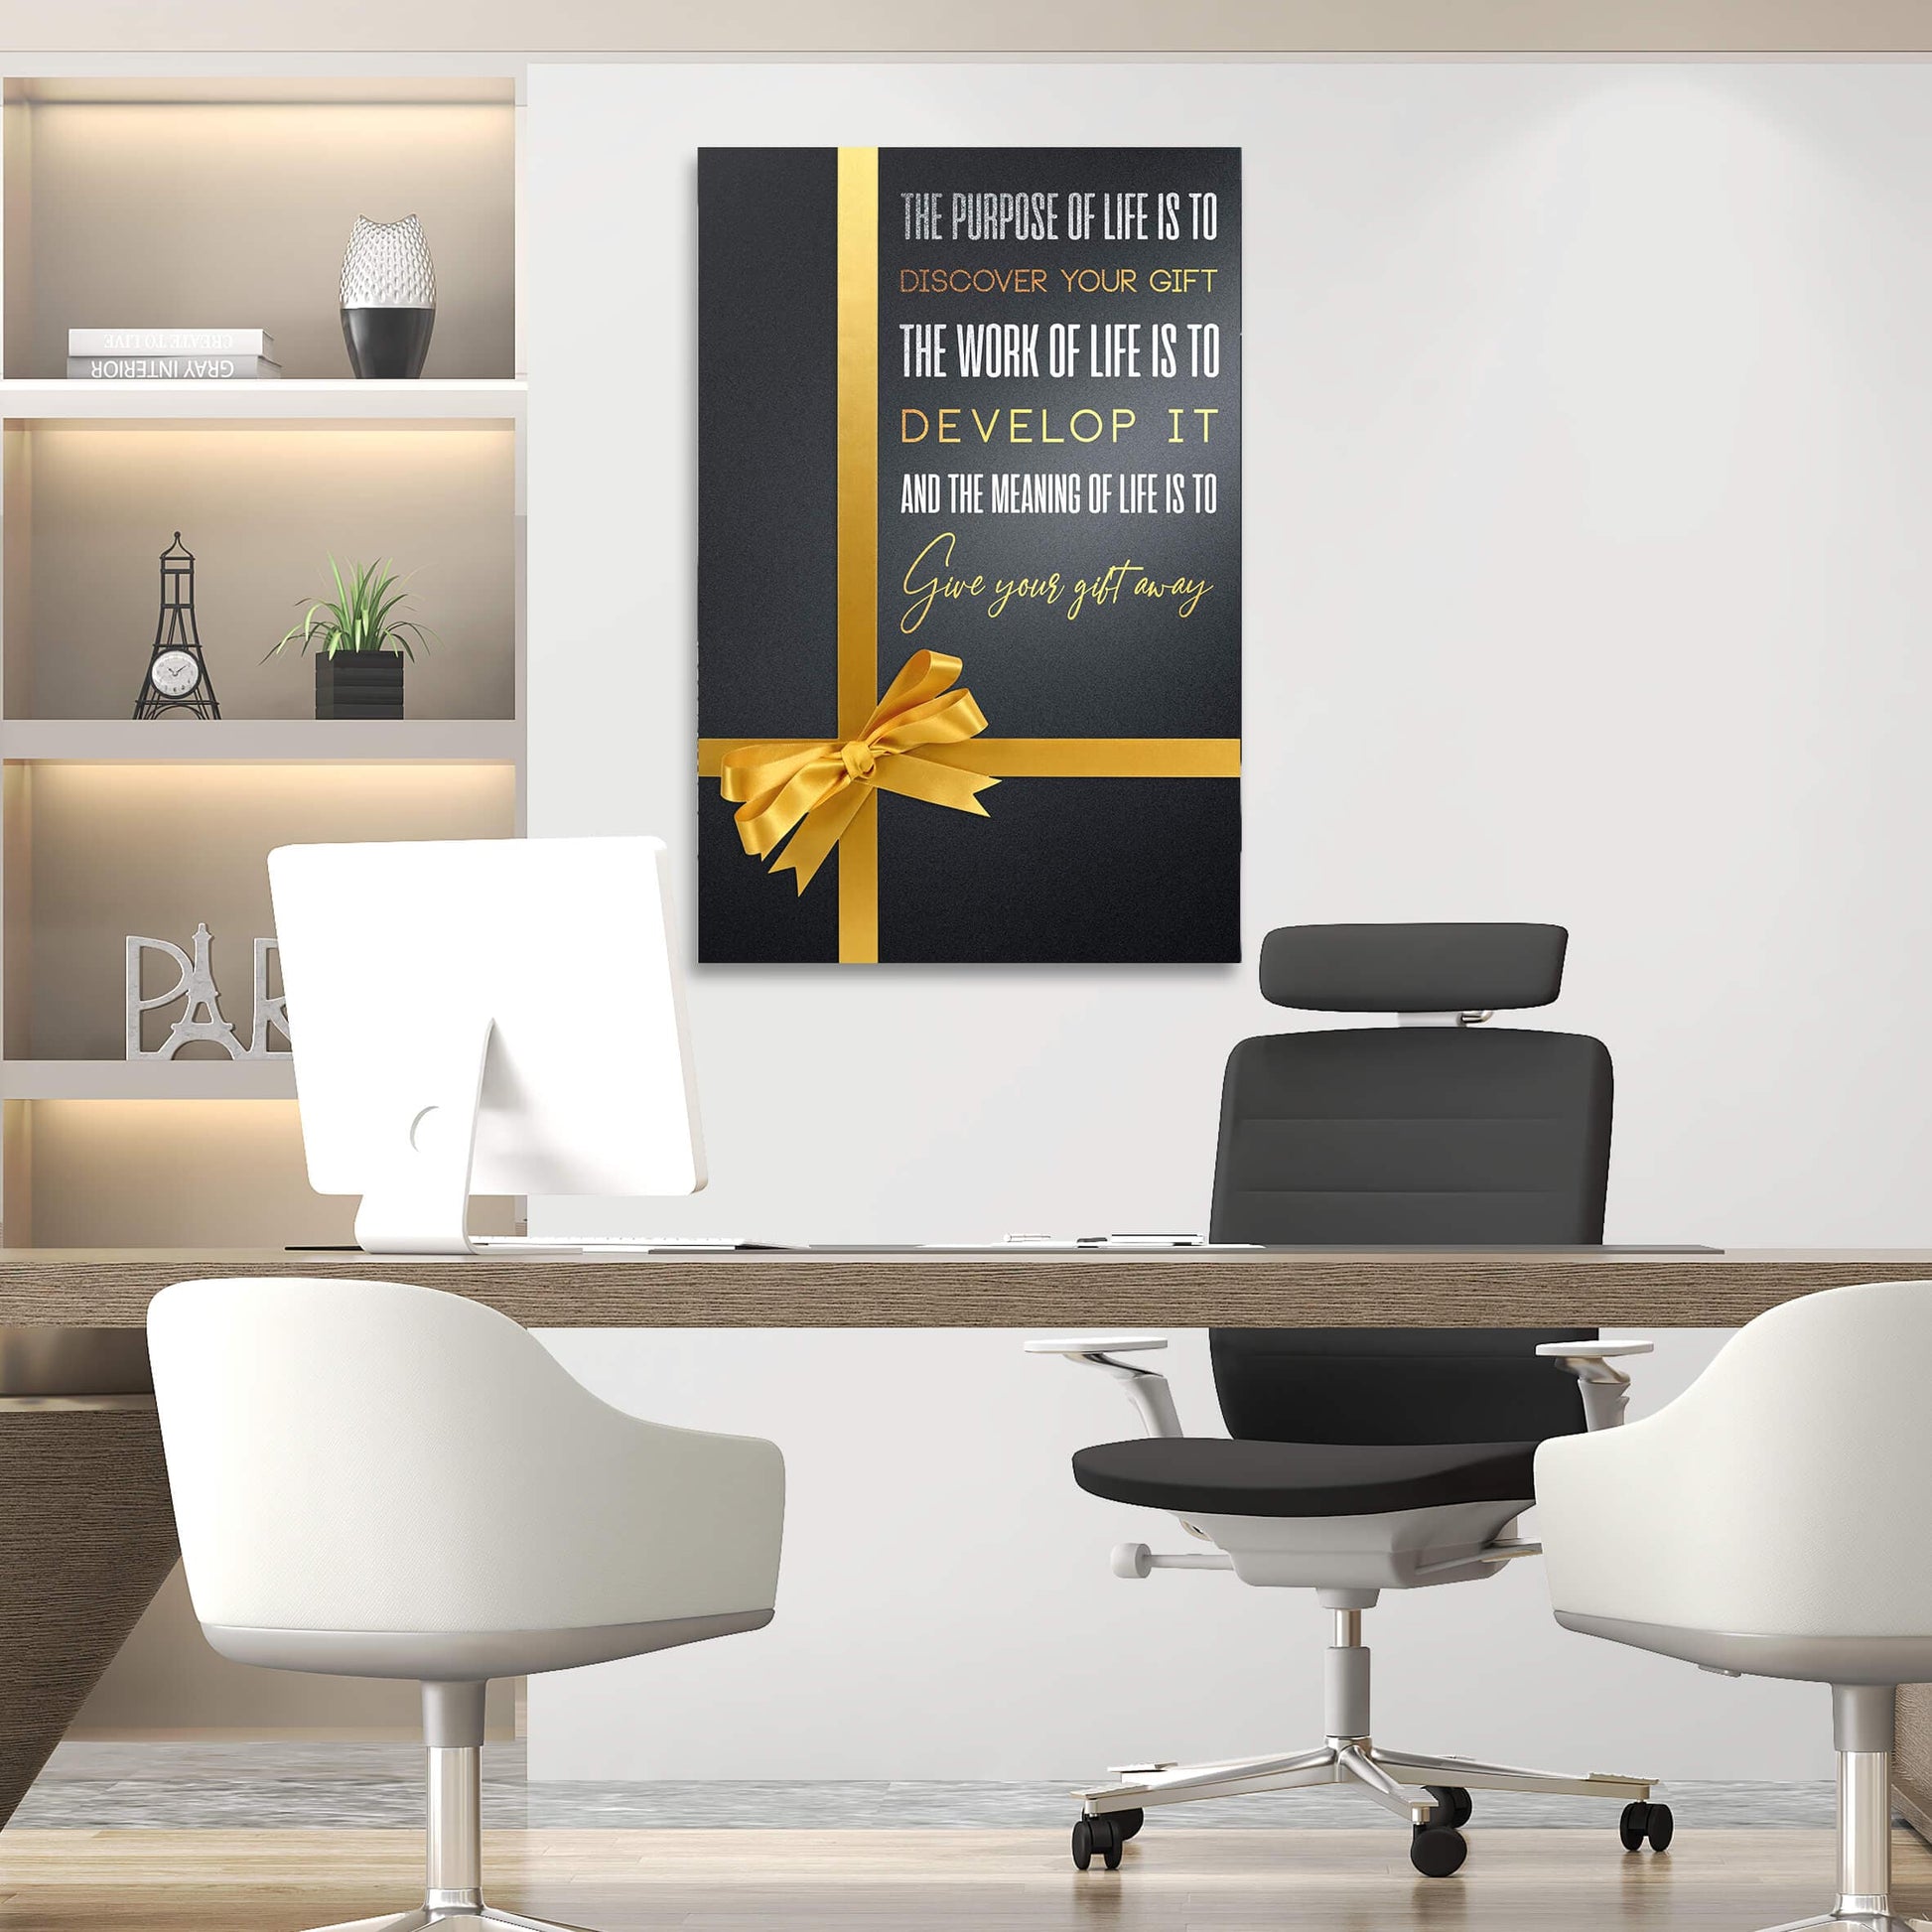 Discover Your Gift Wall Art | Inspirational Wall Art Motivational Wall Art Quotes Office Art | ImpaktMaker Exclusive Canvas Art Portrait